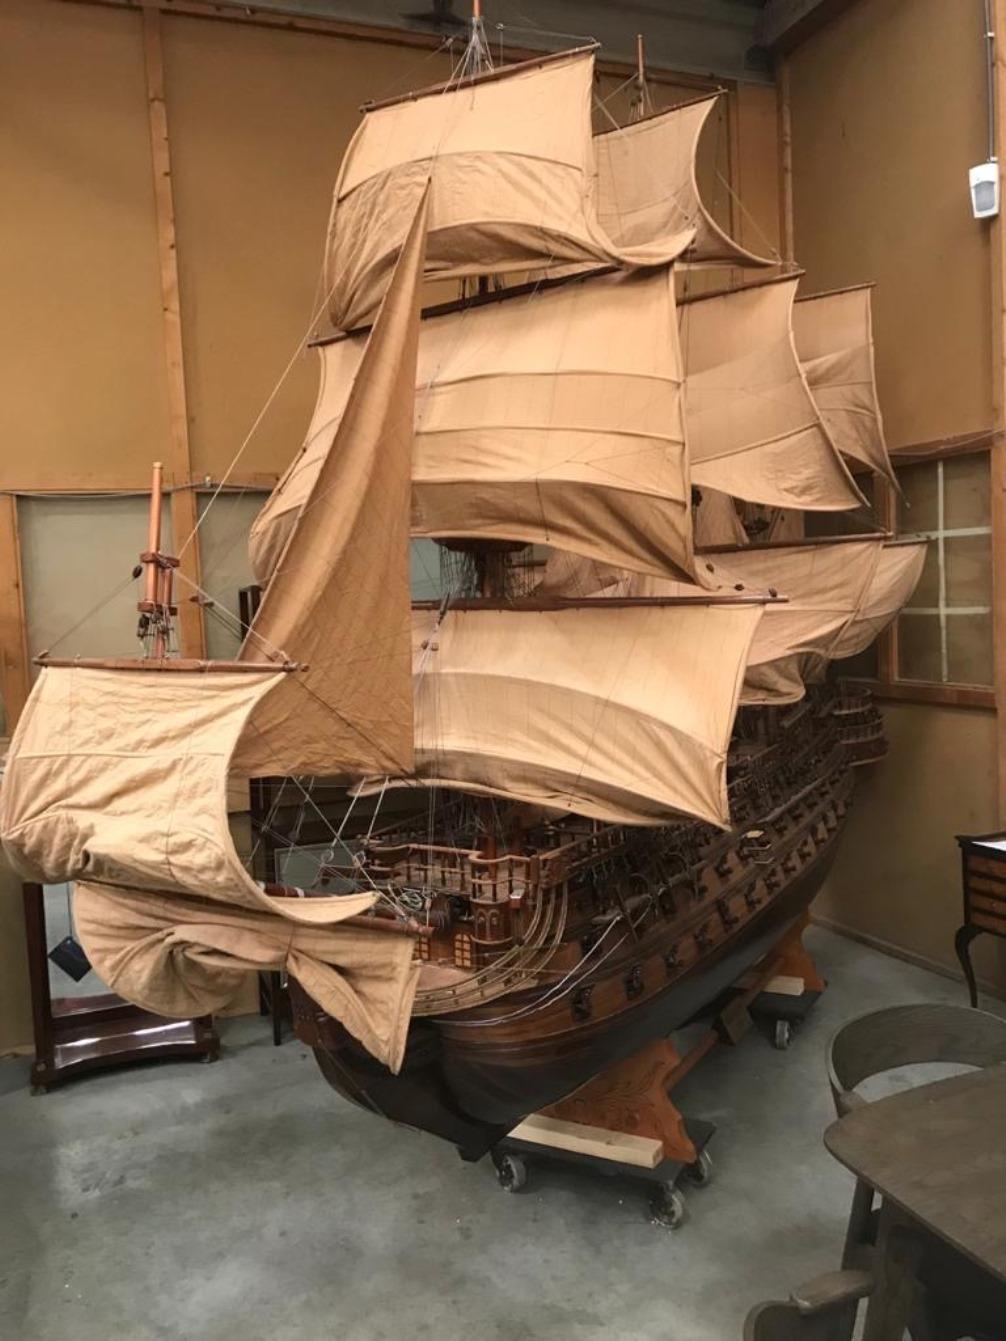 This is a new and exclusive edition of the San Felipe, The ornaments on her body made her more beautiful than any other ships at her time. Thus, to recapture the beauty of this ship into the model, we have used only quality mahogany, the highest